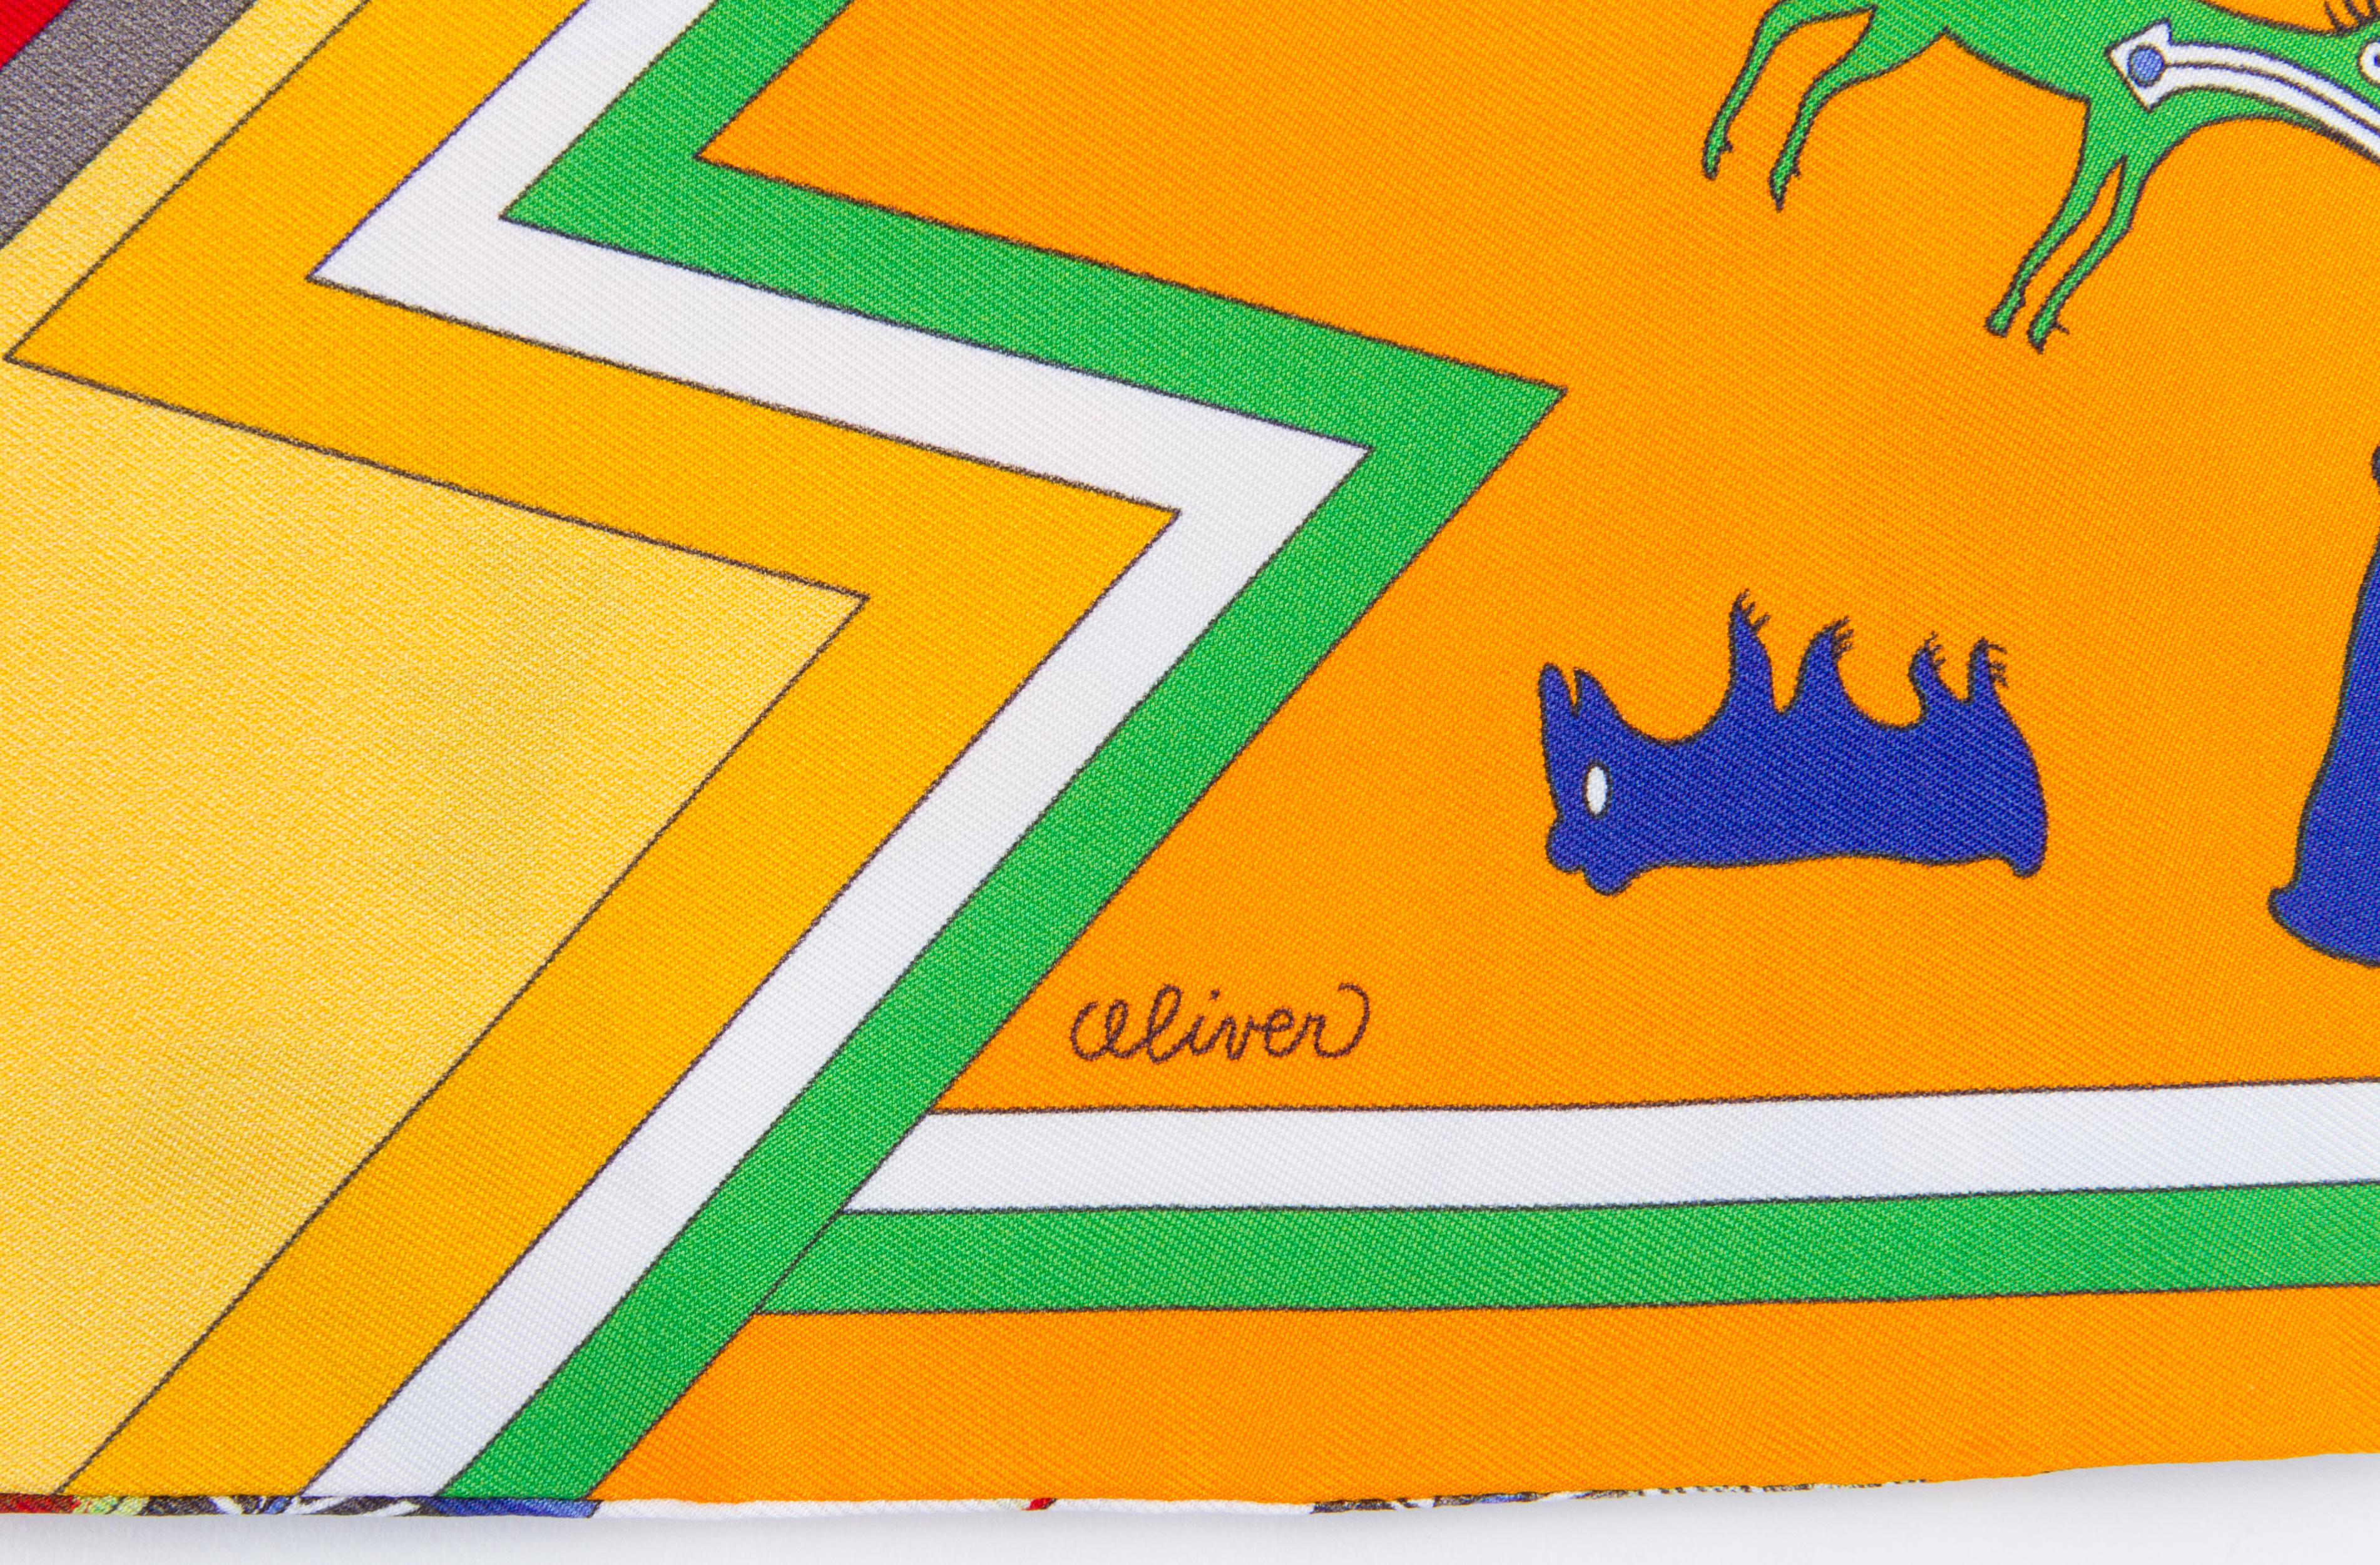 Hermès maxi twilly in the Kachinas print designed by Kermit Oliver. Comes with original box.
